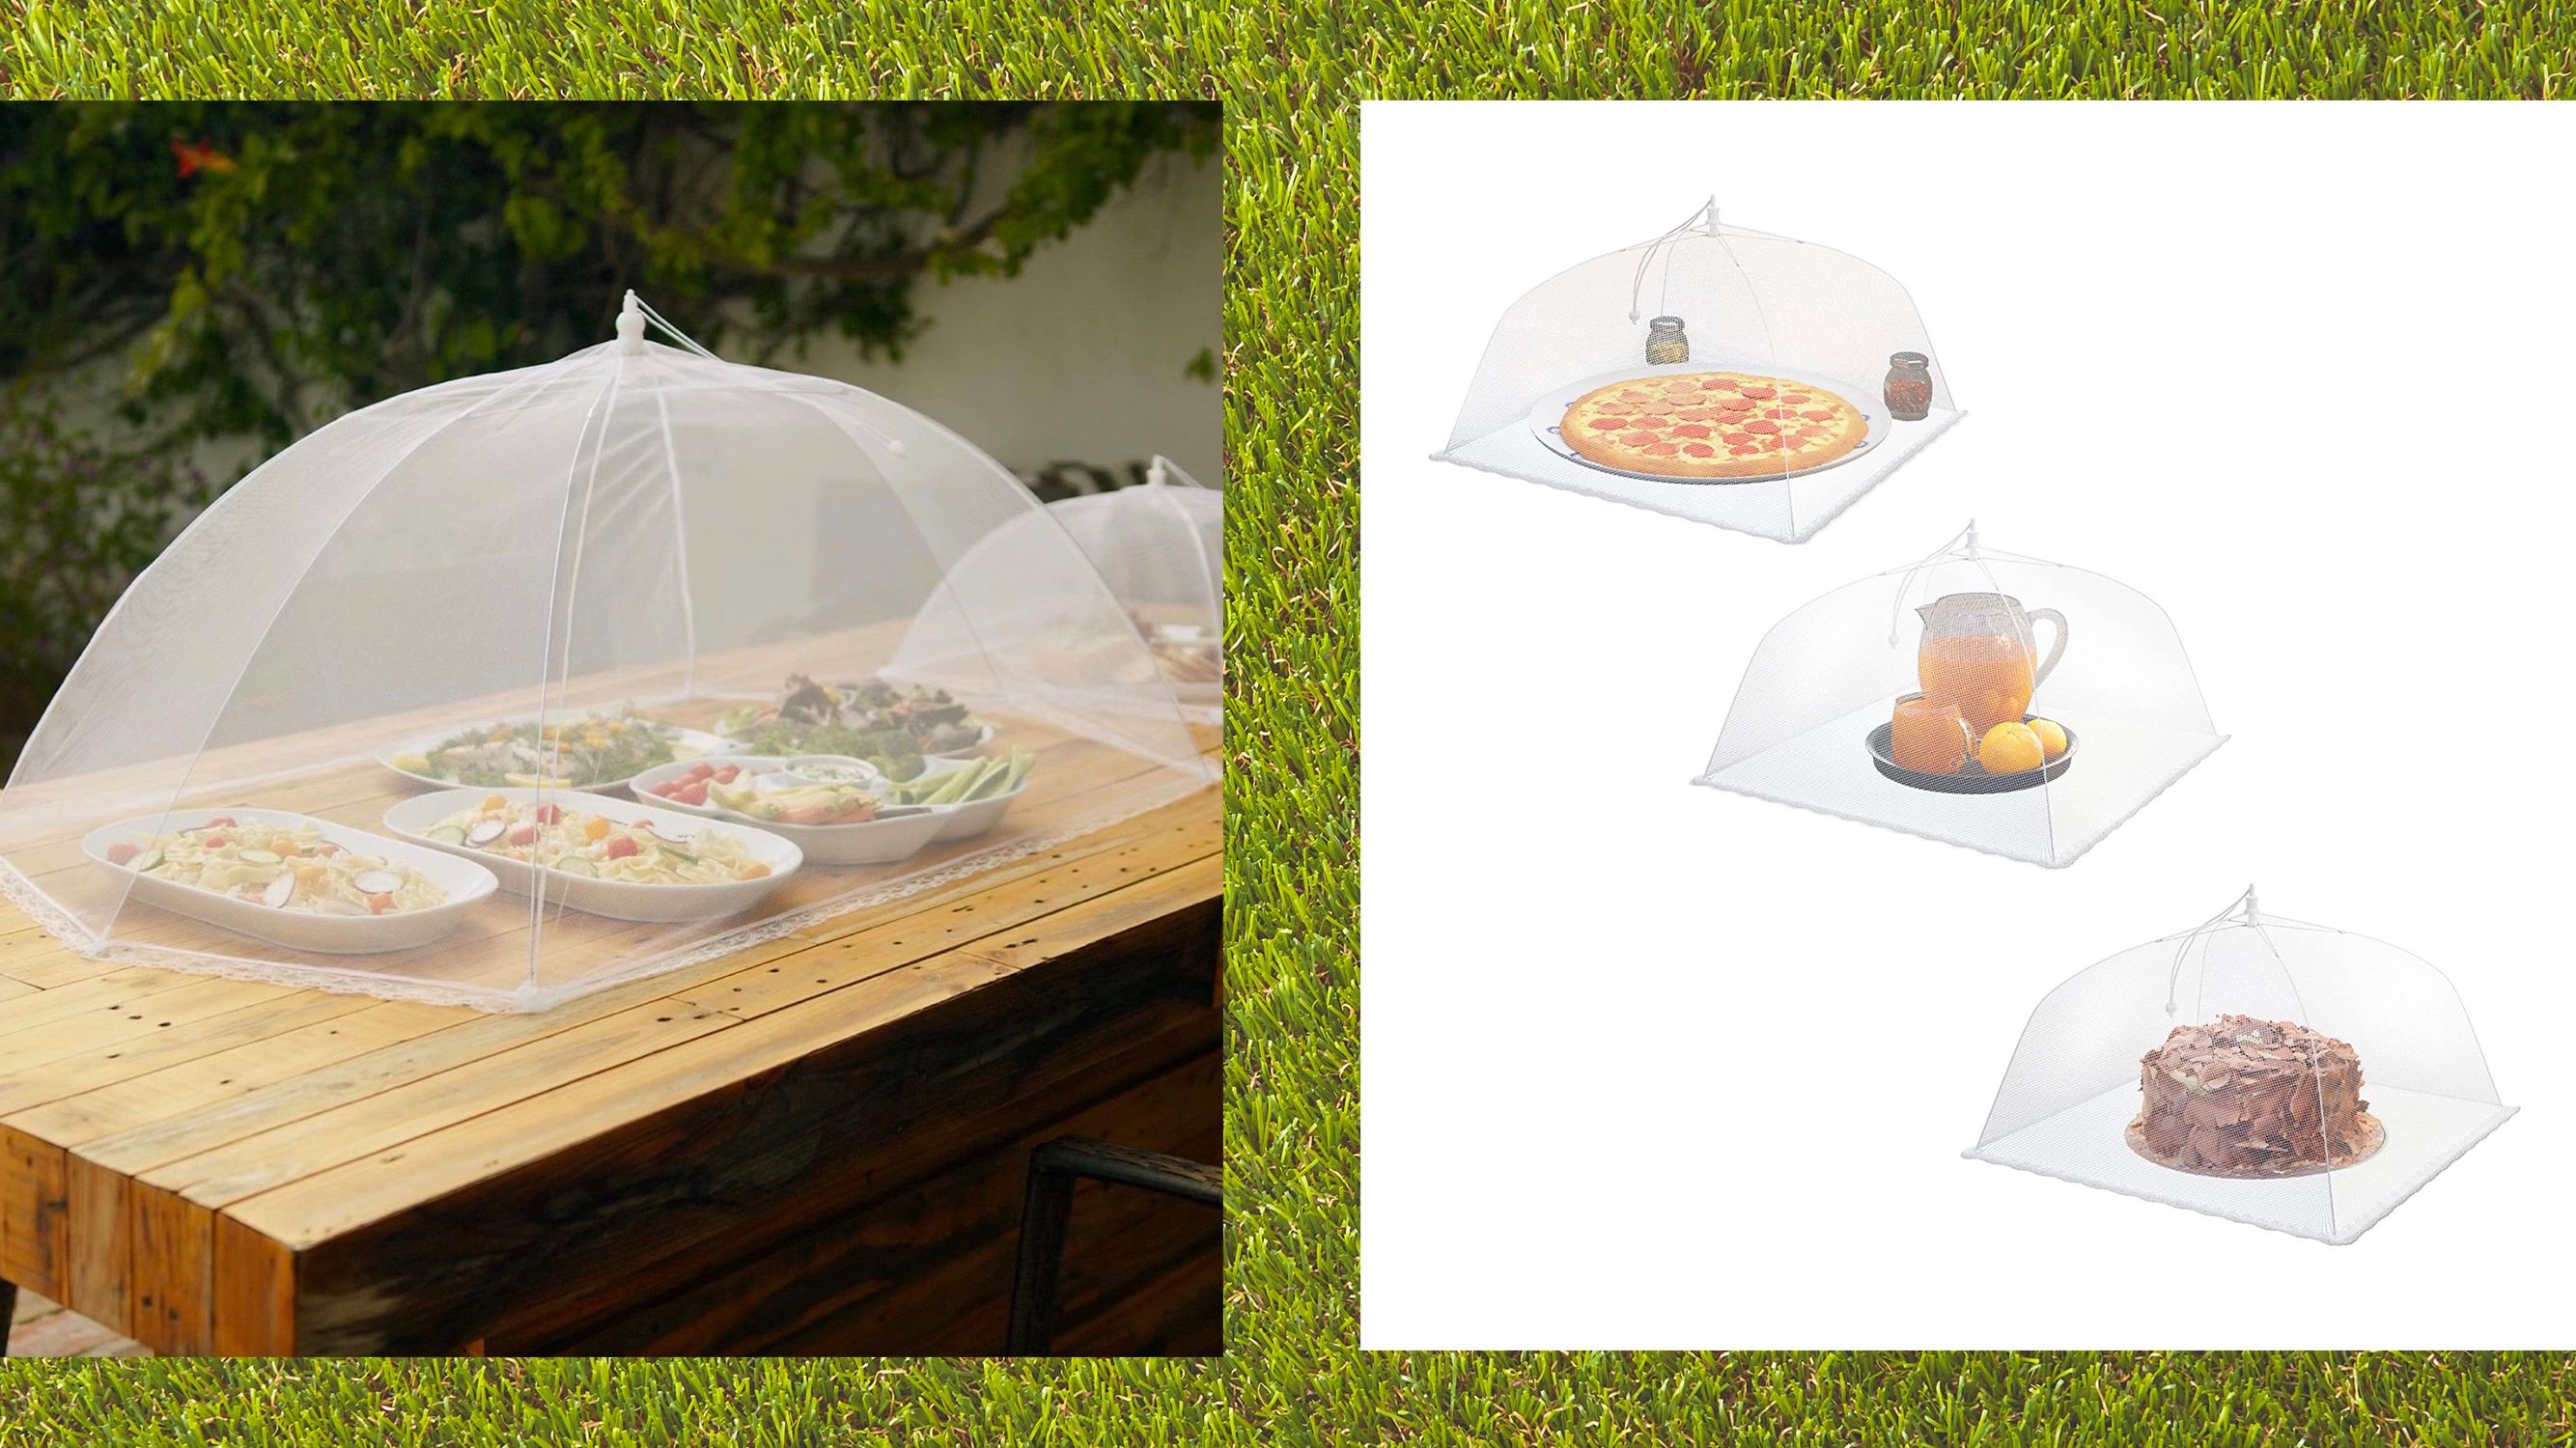 Stainless Steel Food Covers Metal Mesh Food Cover Dish Cover Net